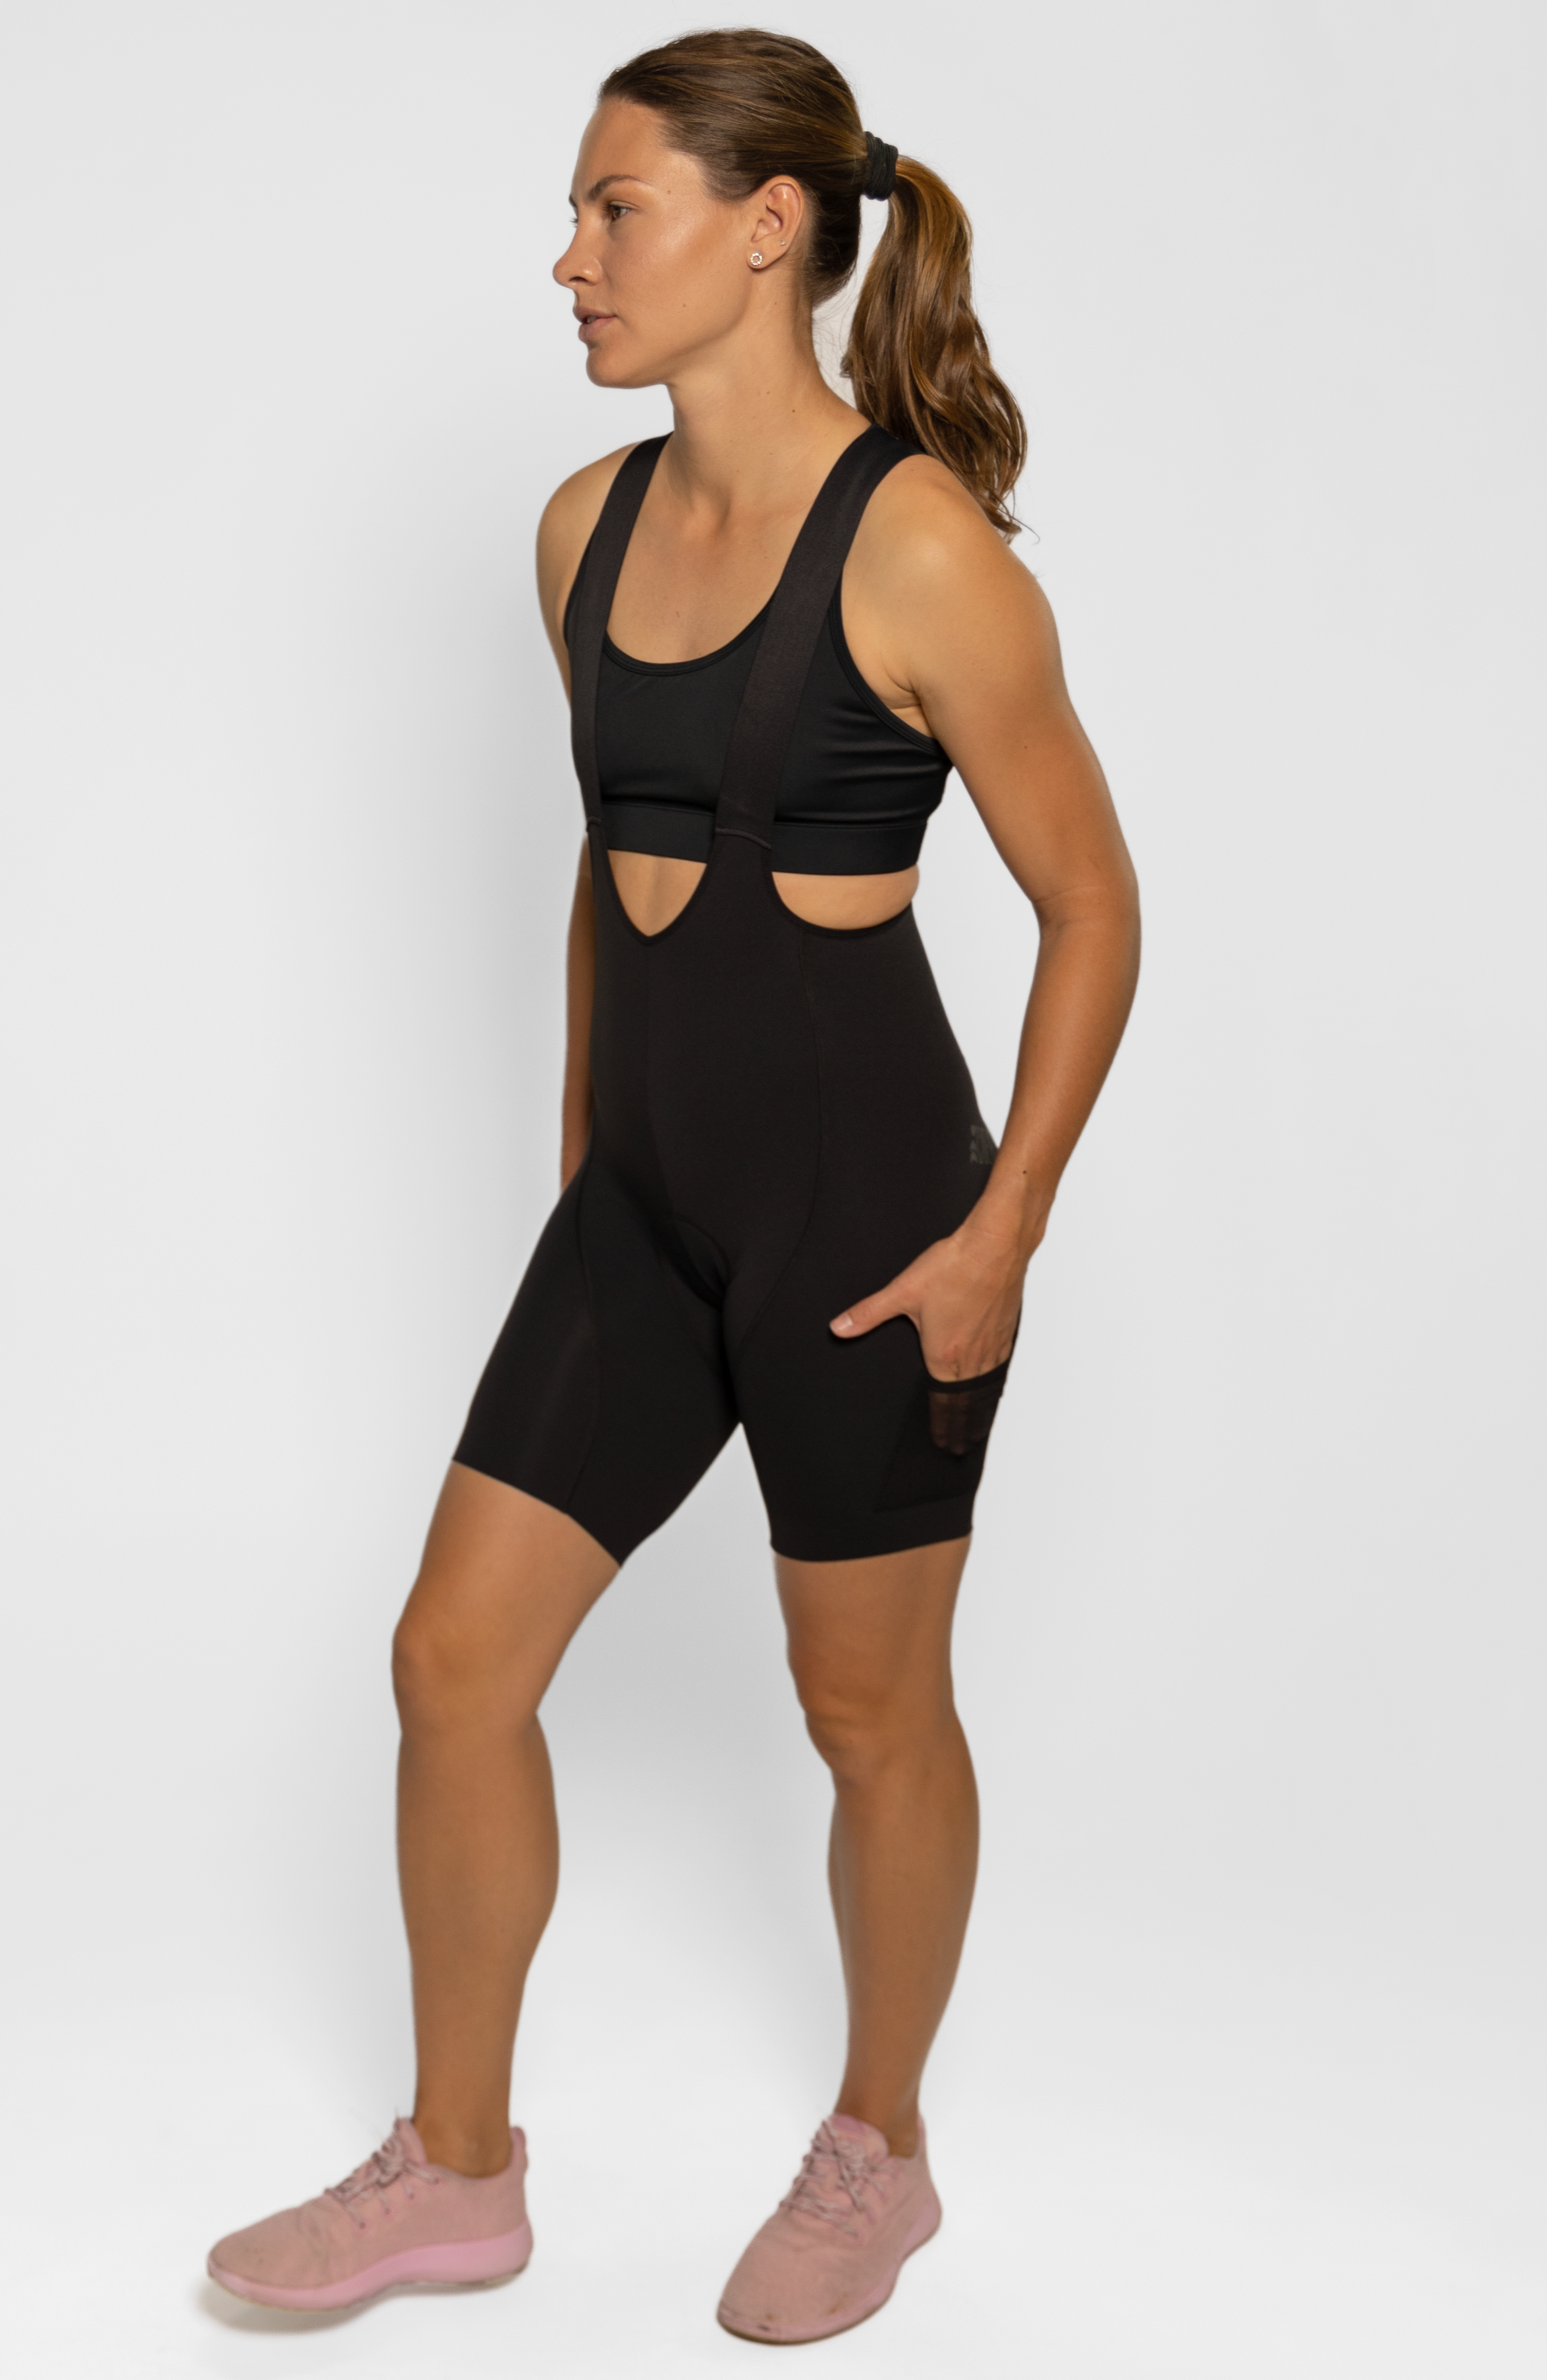 Aurola Shorts  Cute workout outfits, Yoga shorts outfit, Workout outfit